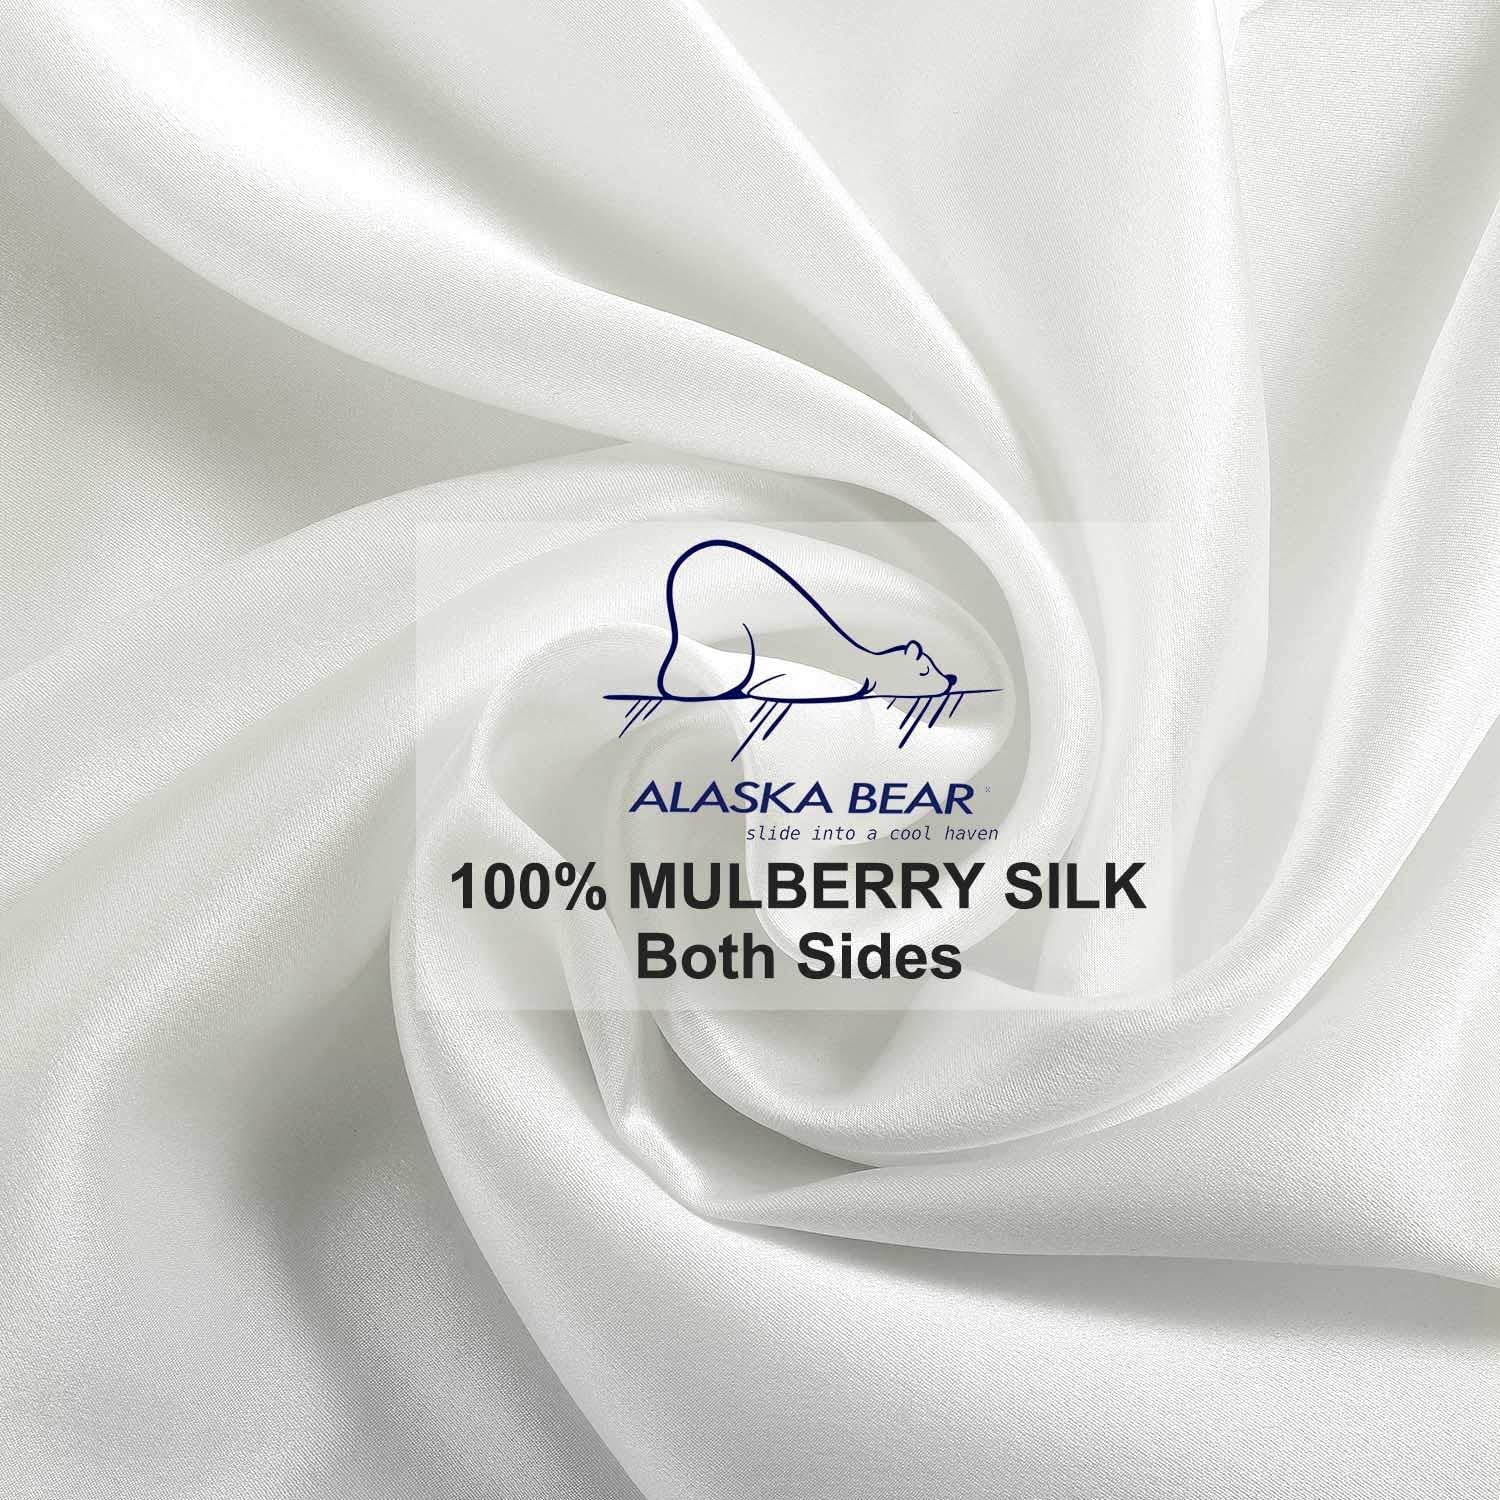 100% Mulberry Silk Pillowcase for Hair and Skin Health, Hypoallergenic, Standard Size 50X75Cm Natural Silk Pillow Case Slip Beauty Sleep (1Pc, Ivory White)